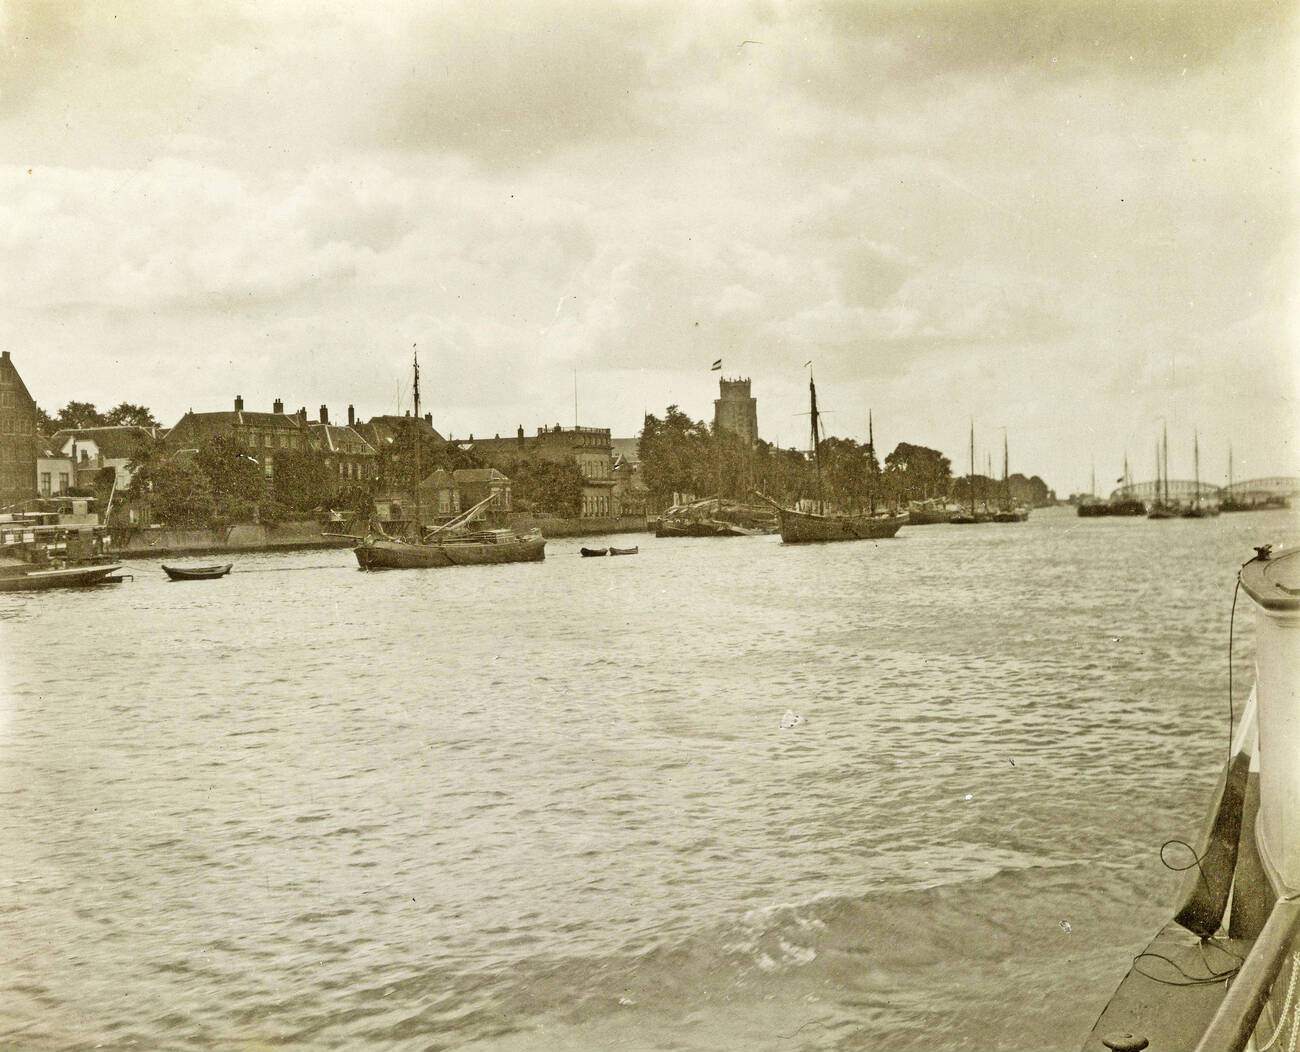 View of Dordrecht and the Merwede, The Netherlands, 1900